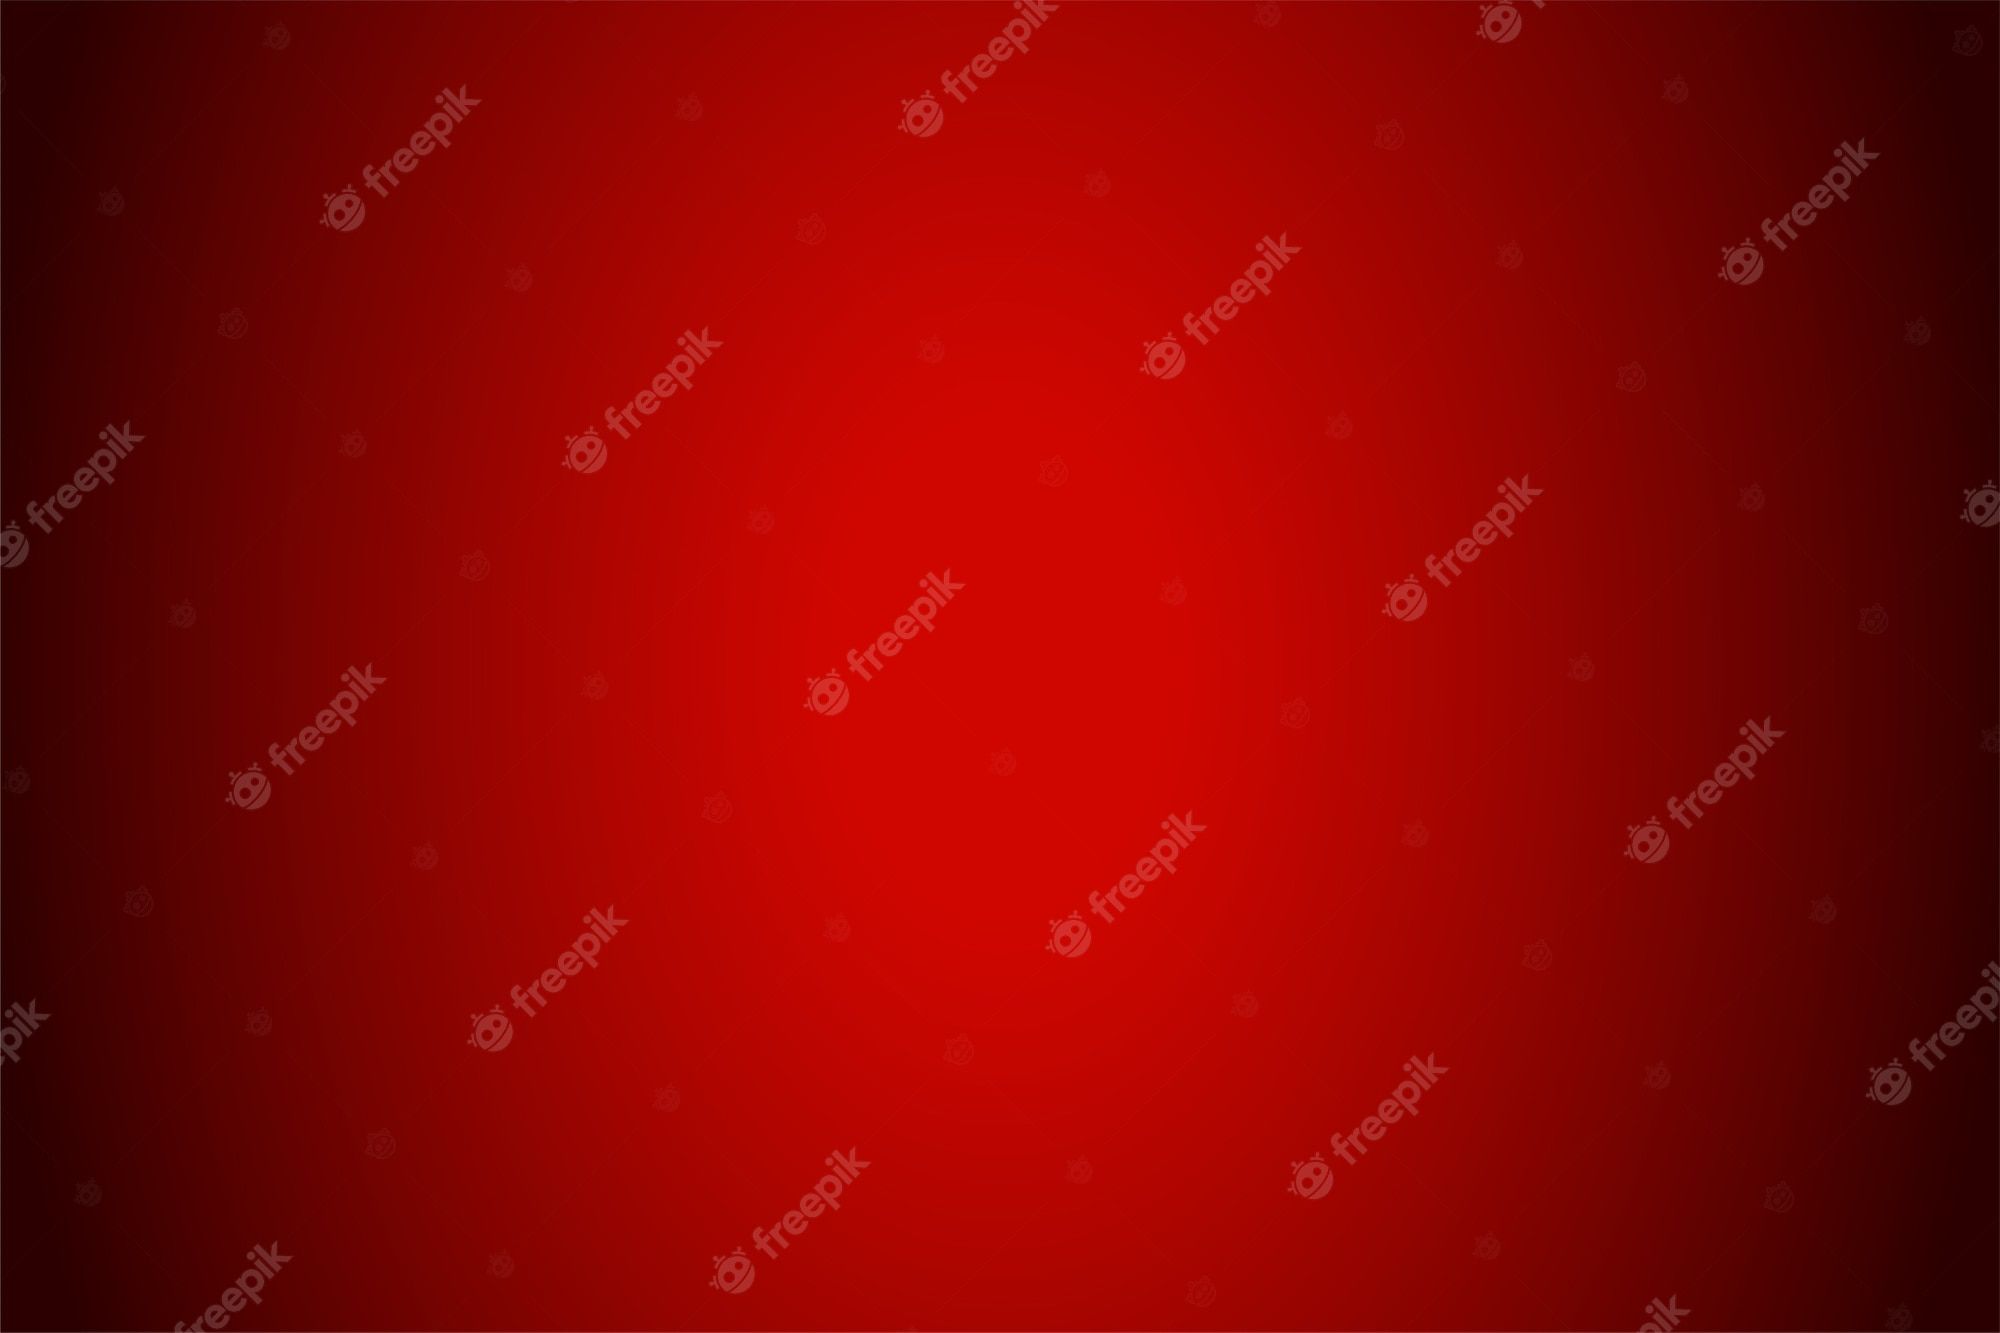 Red background with stars - Dark red